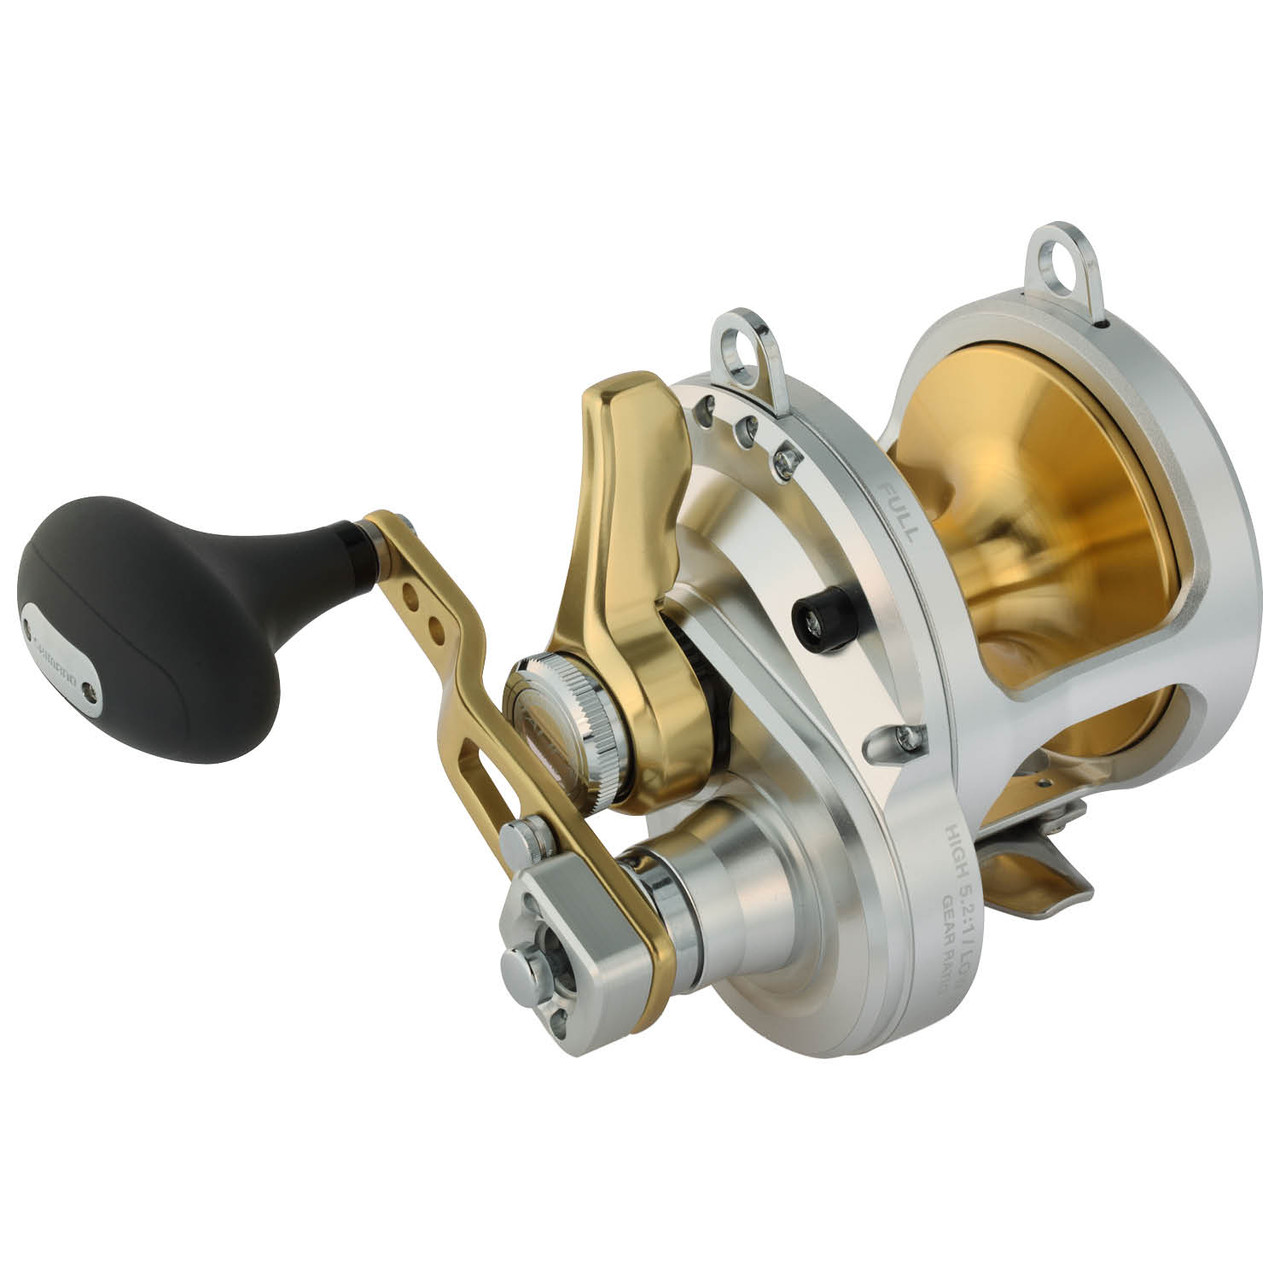 LP122 Shimano FX II Closed Face Spincast Old Vintage Fish Reel Fightin Drag  System Ex Shape These Old Stock Shimano's Are Great -  Canada